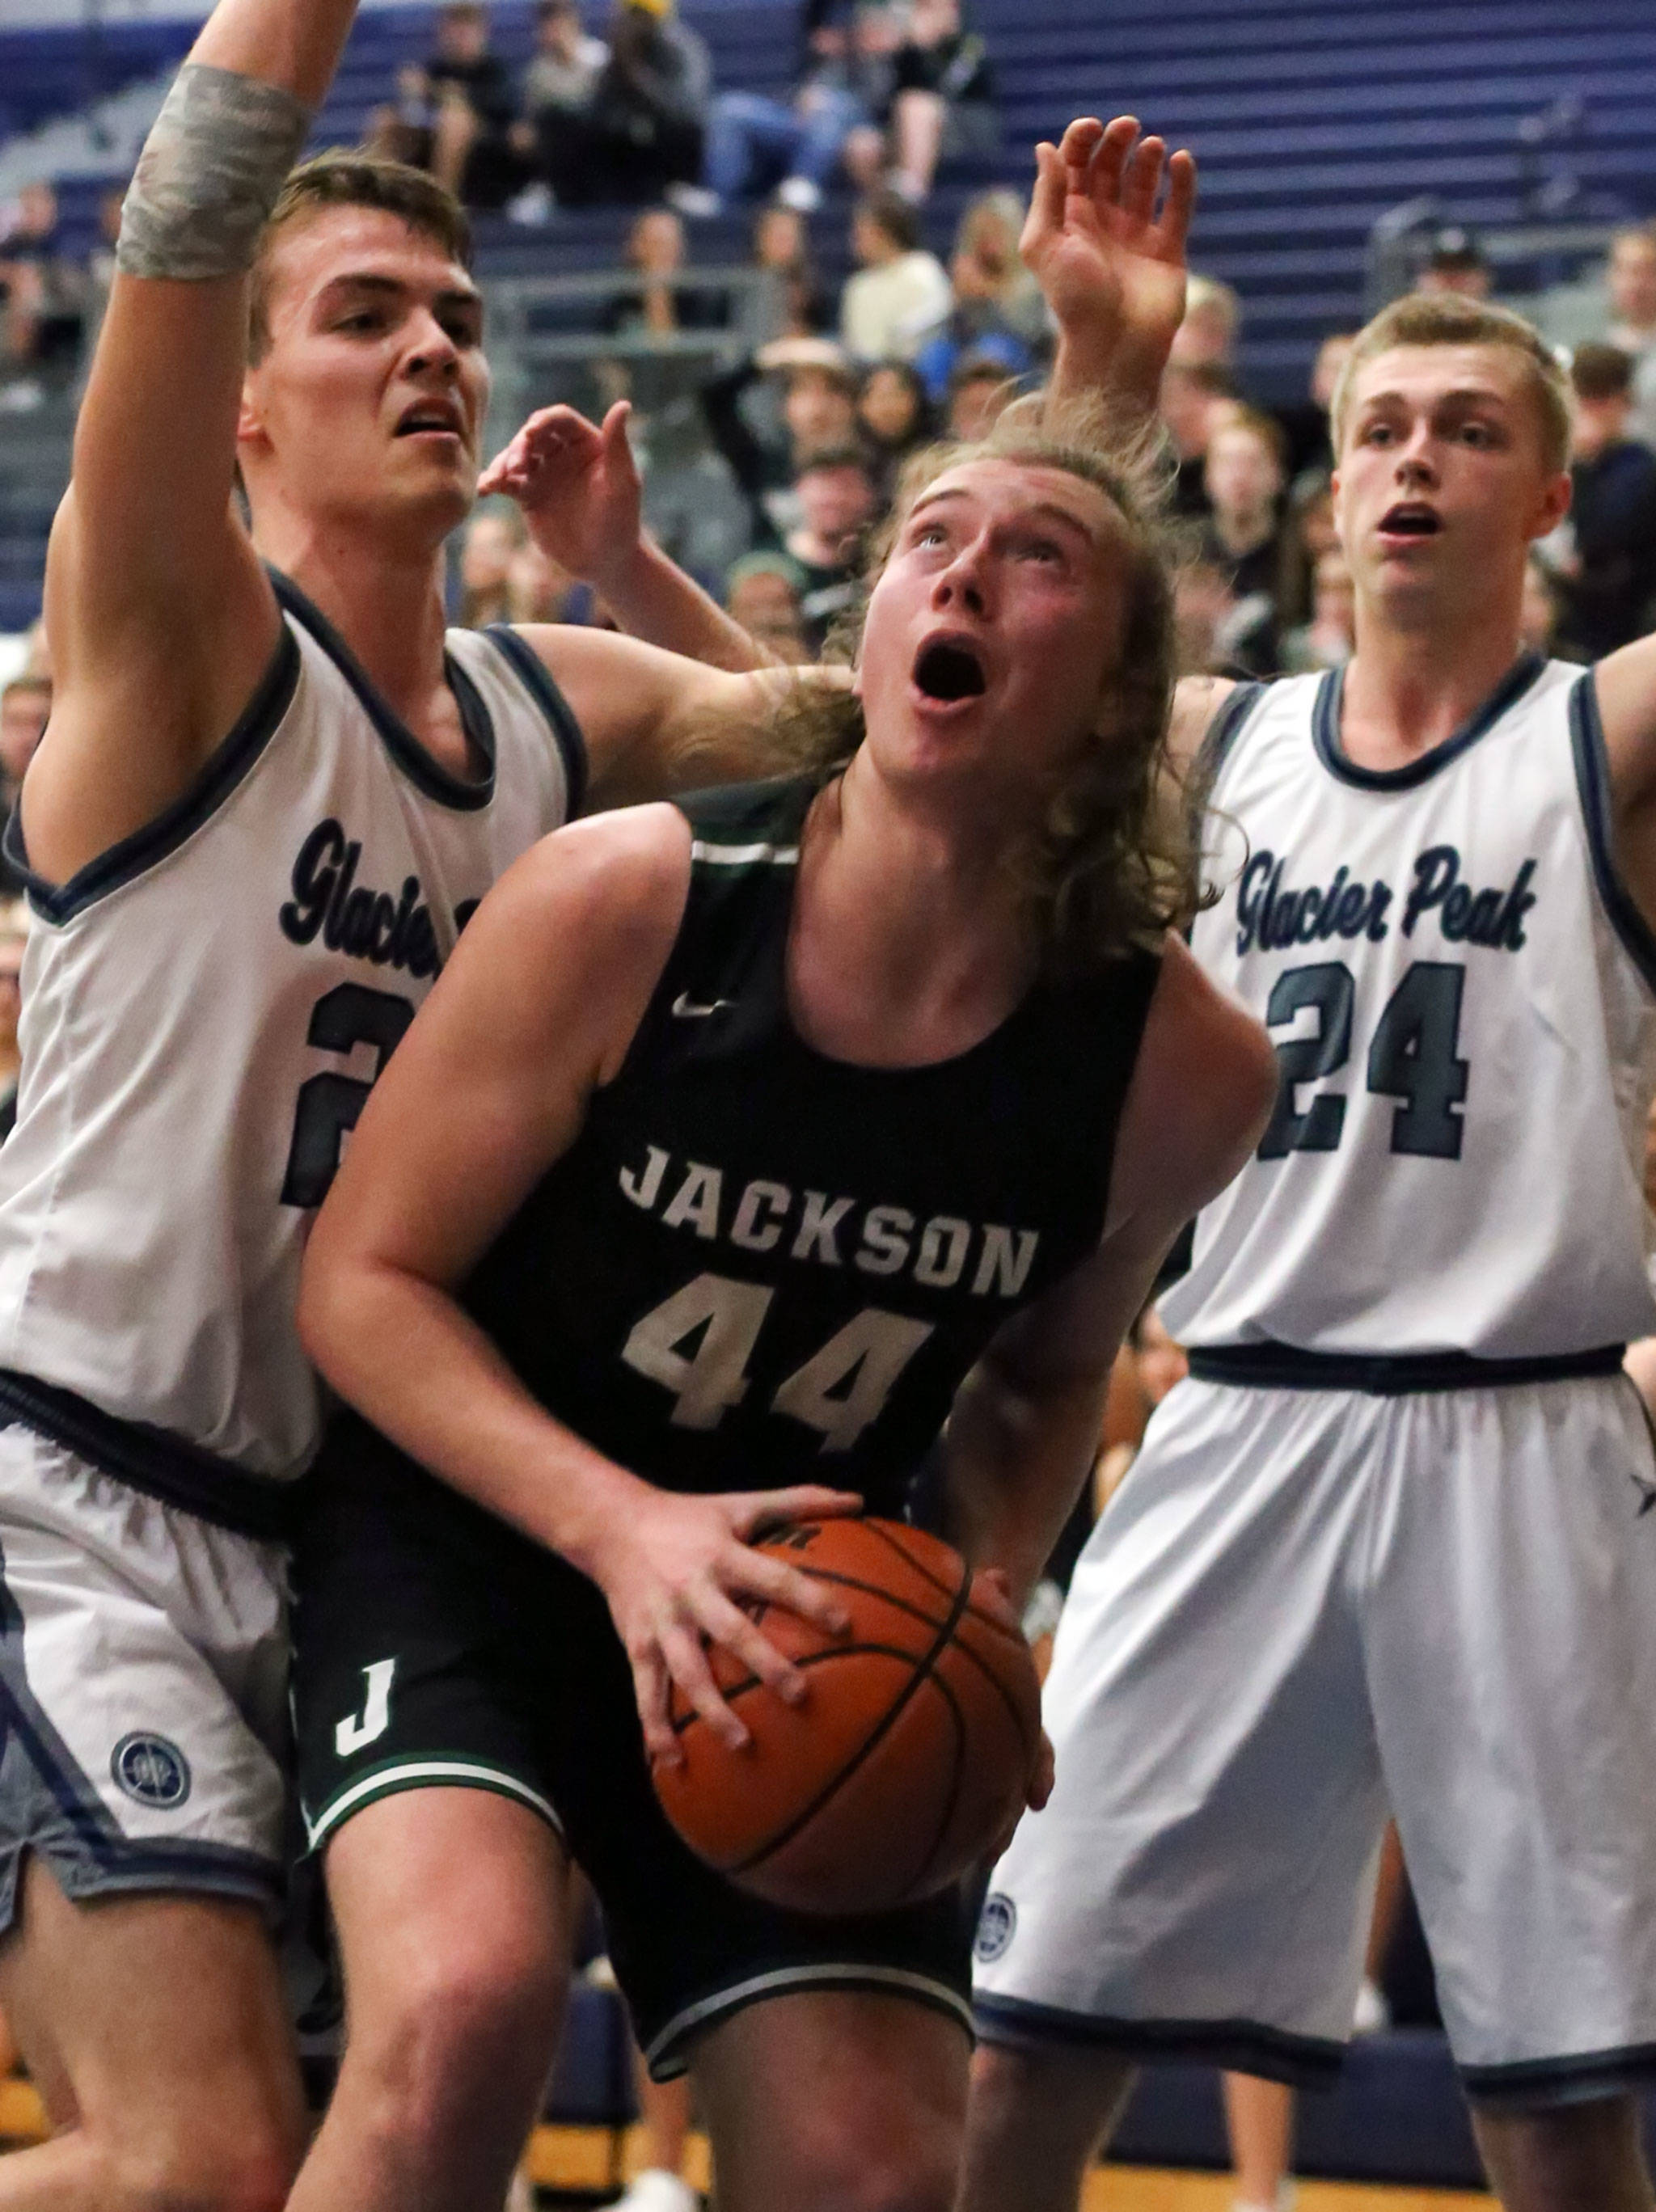 Jackson’s Joe Capponi (44) looks for a shot while Glacier Peak’s Noah Forman (left) and Glacier Peak’s Evan Mannes defend during a Wesco 4A boys basketball game Wednesday in Snohomish. Capponi and the Timberwolves fought past the Grizzlies for a 47-44 victory that ensured Jackson will have the conference’s top seed to the Wes-King 4A District tournament, which begins next weekend. (Kevin Clark / The Herald)